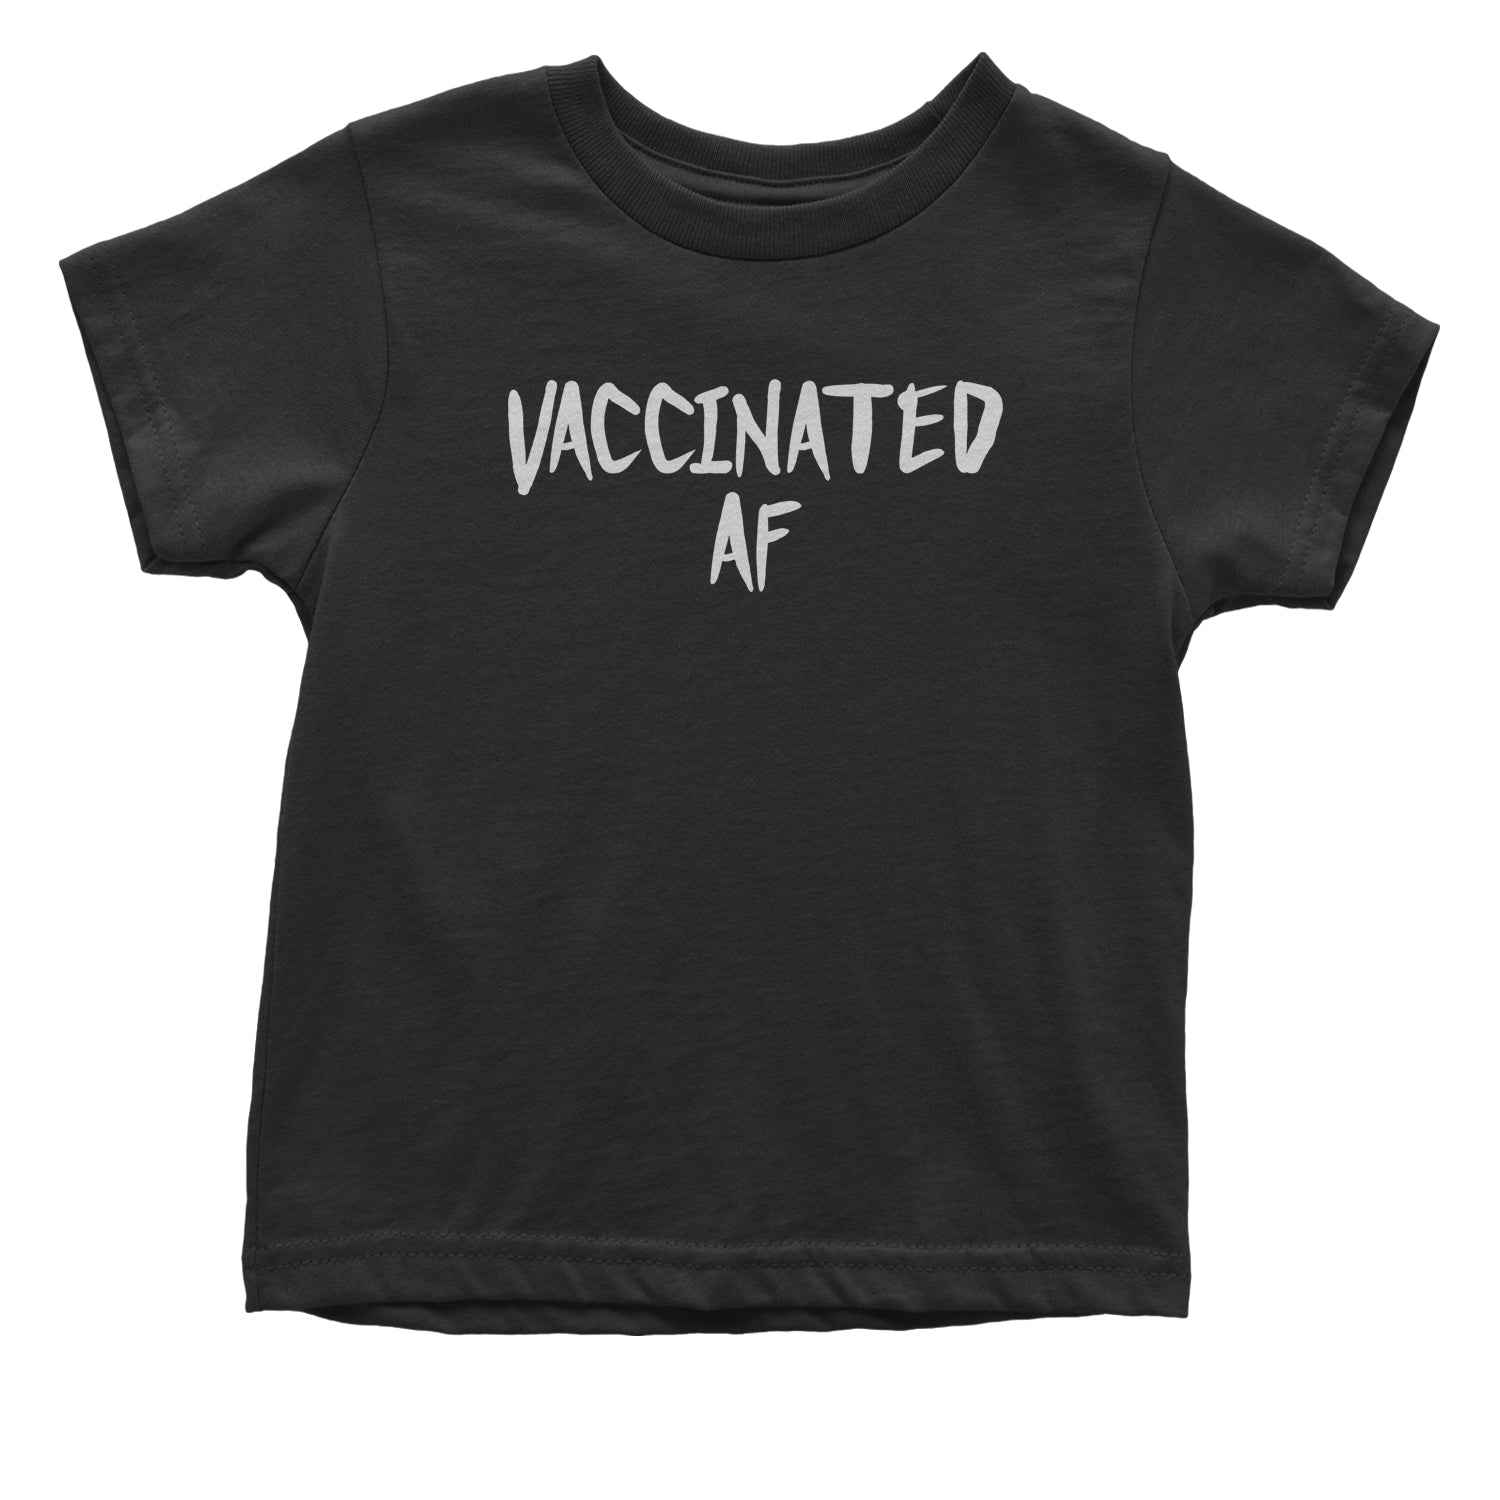 Vaccinated AF Pro Vaccine Funny Vaccination Health Toddler T-Shirt moderna, pfizer, vaccine, vax, vaxx by Expression Tees